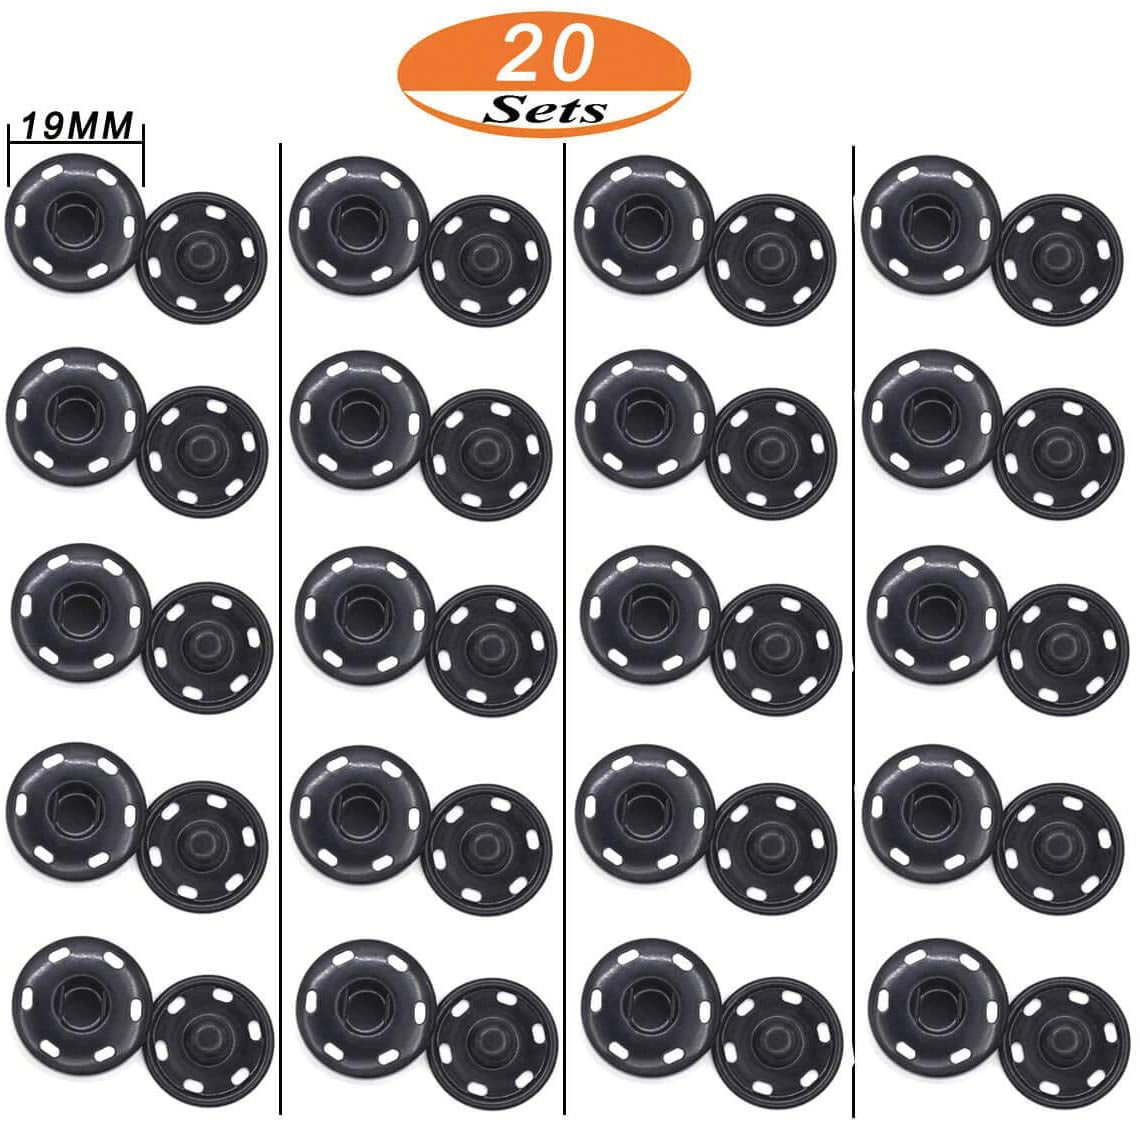 Rust Proof Metal Coat Invisible Sew-on Black Buttons for Clothes Craft Repairs Decoration Opopark Press Studs Snaps Fasteners Buttons 19mm 20 Sets 